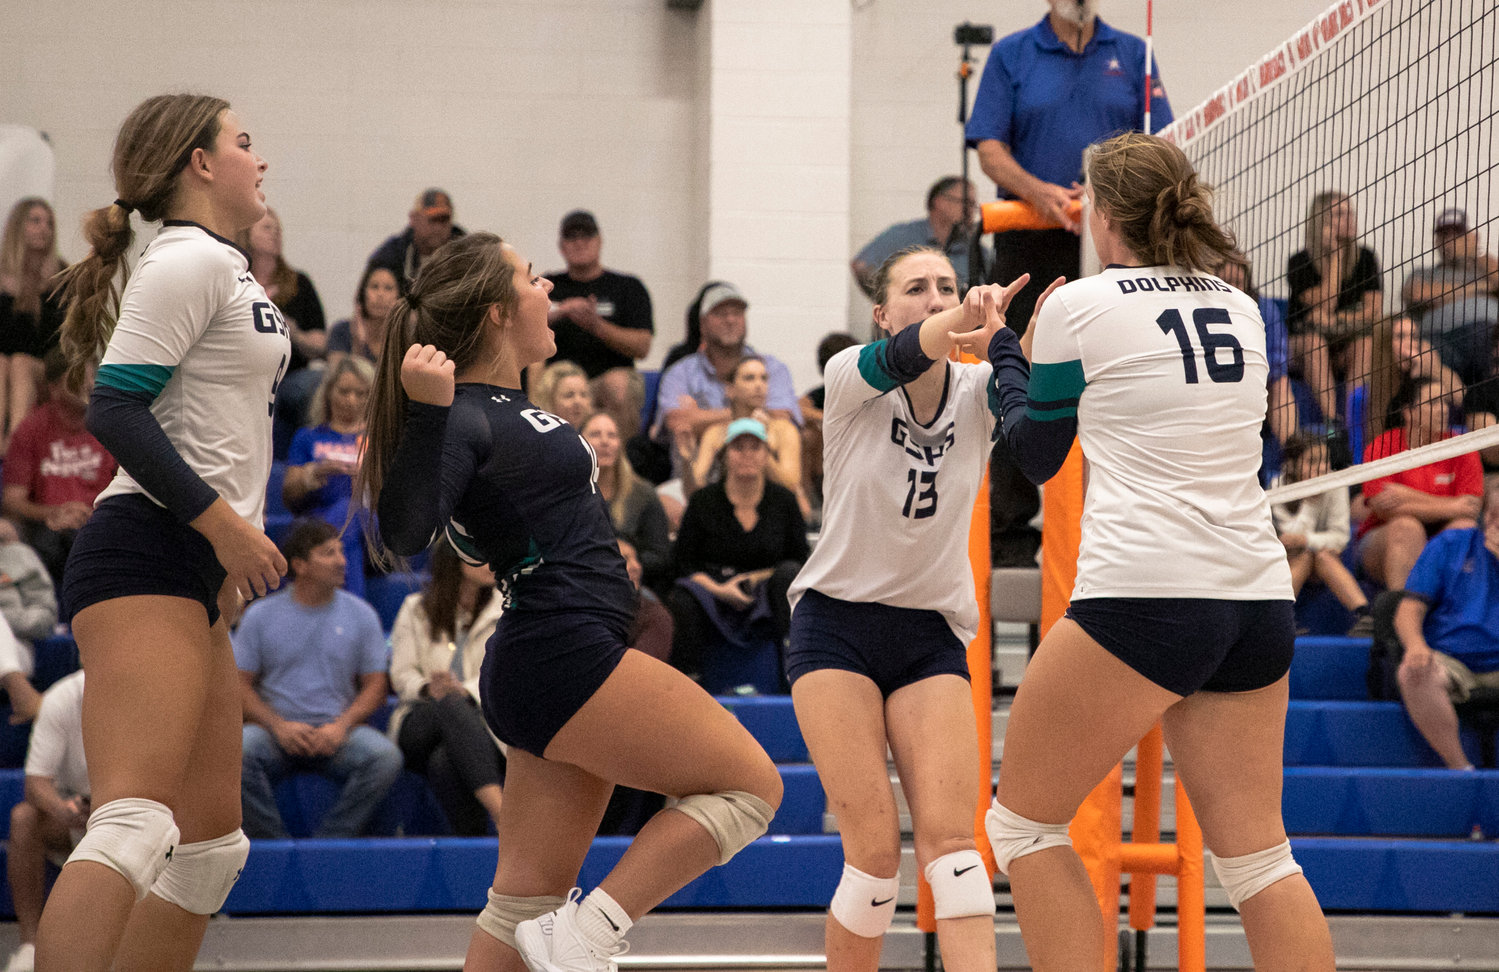 The Gulf Shores Dolphins celebrate a point during tri-match action against Curry at Orange Beach High School Aug. 25. Gulf Shores earned a pair of regional wins to punch its first ticket to the state tournament since 2011.